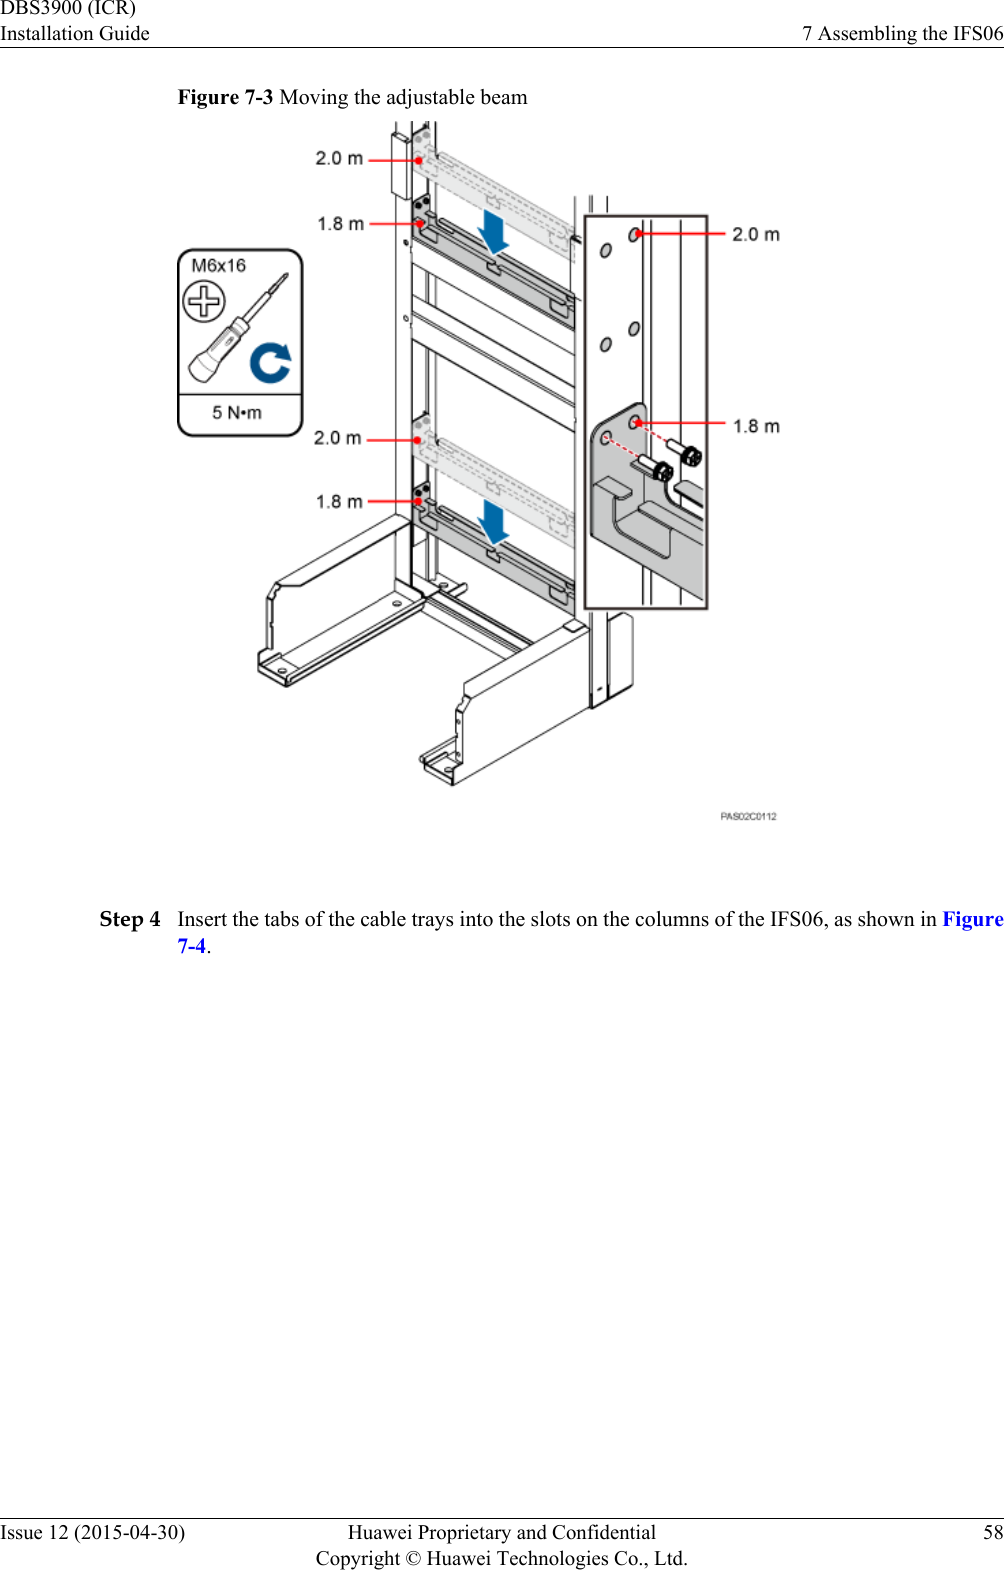 Figure 7-3 Moving the adjustable beam Step 4 Insert the tabs of the cable trays into the slots on the columns of the IFS06, as shown in Figure7-4.DBS3900 (ICR)Installation Guide 7 Assembling the IFS06Issue 12 (2015-04-30) Huawei Proprietary and ConfidentialCopyright © Huawei Technologies Co., Ltd.58